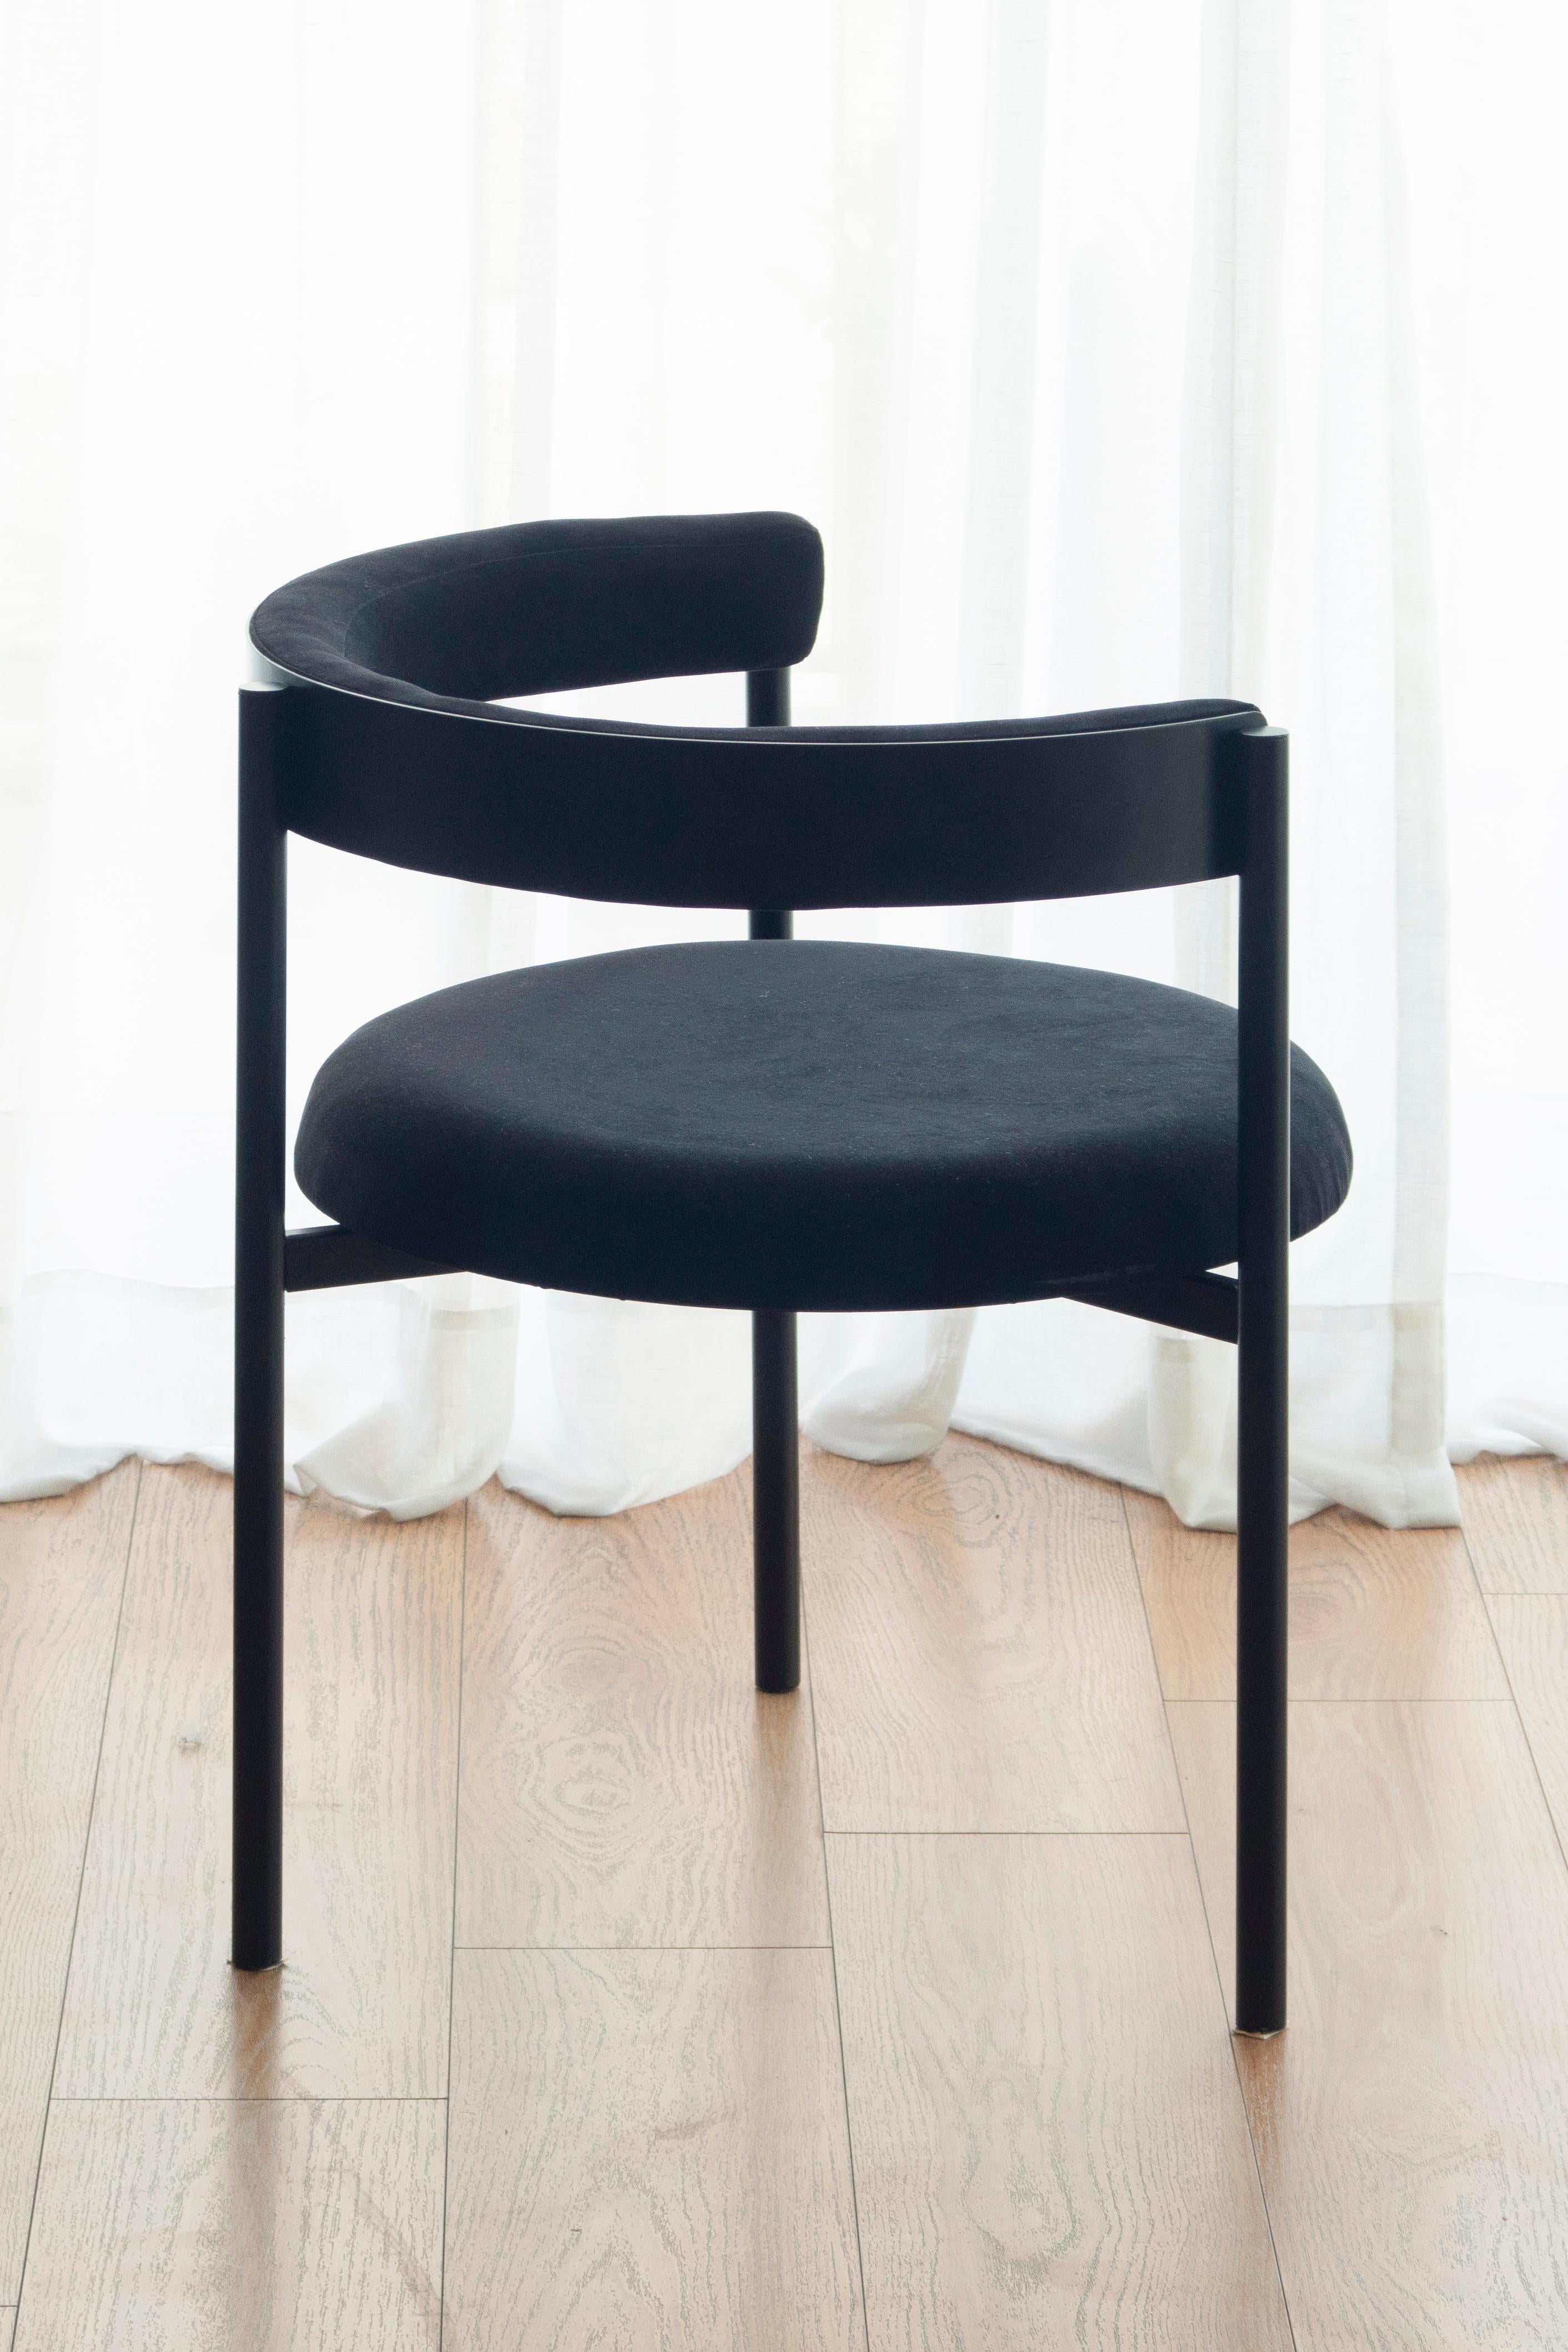 Modern Set of 2 Aro Chairs, Black by Ries